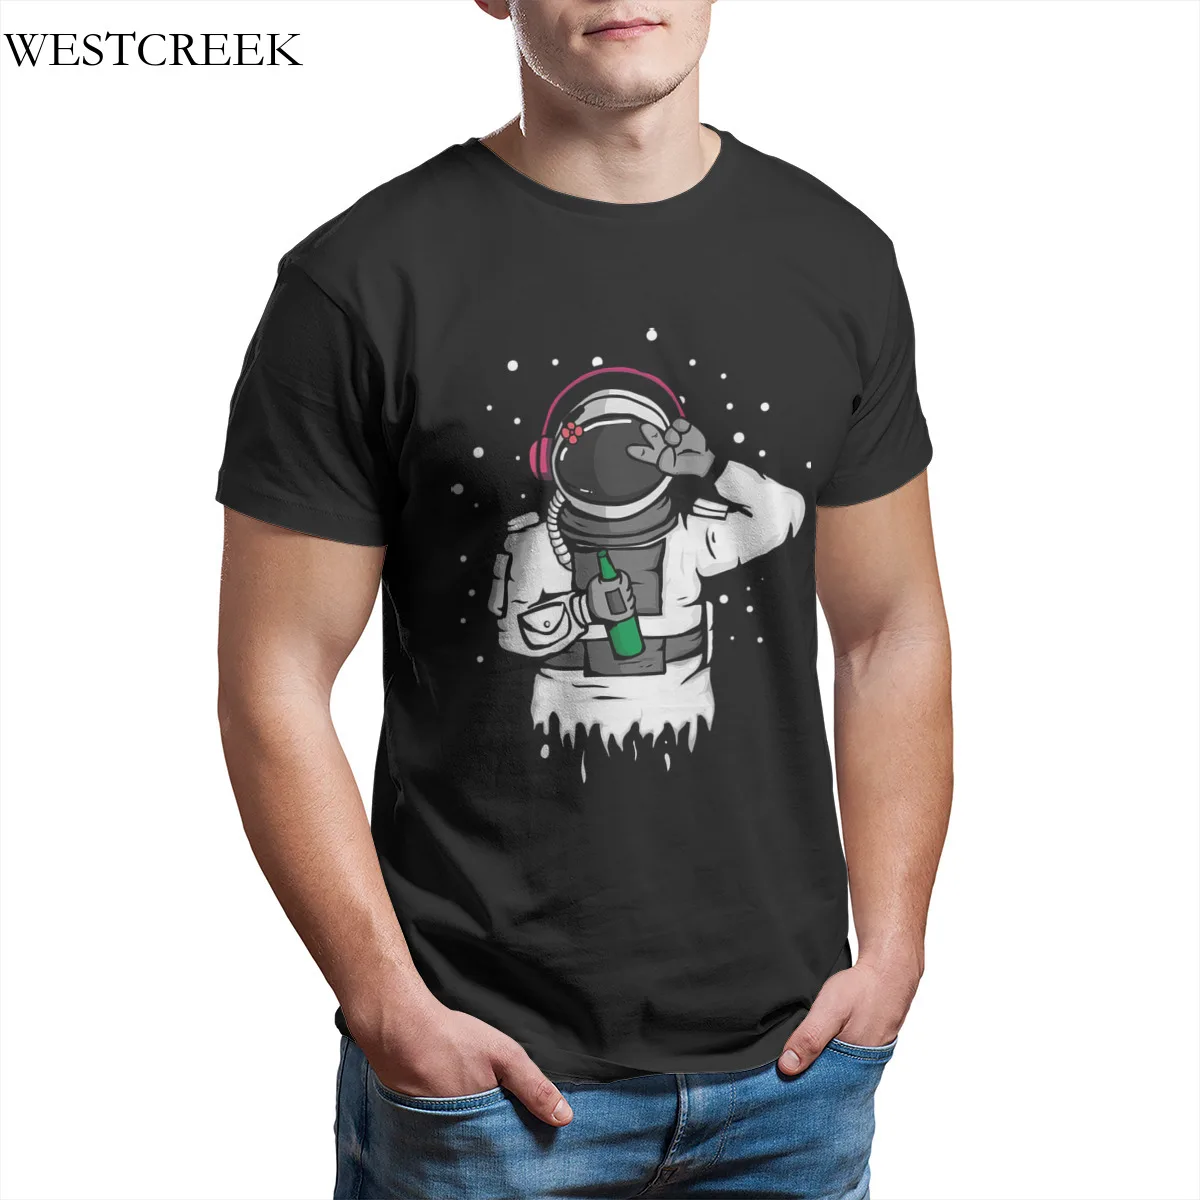 

Wholesale Men's T-Shirt Music Astronaut and Peace Print Couples Matching Top quality Custom T-Shirt 33334